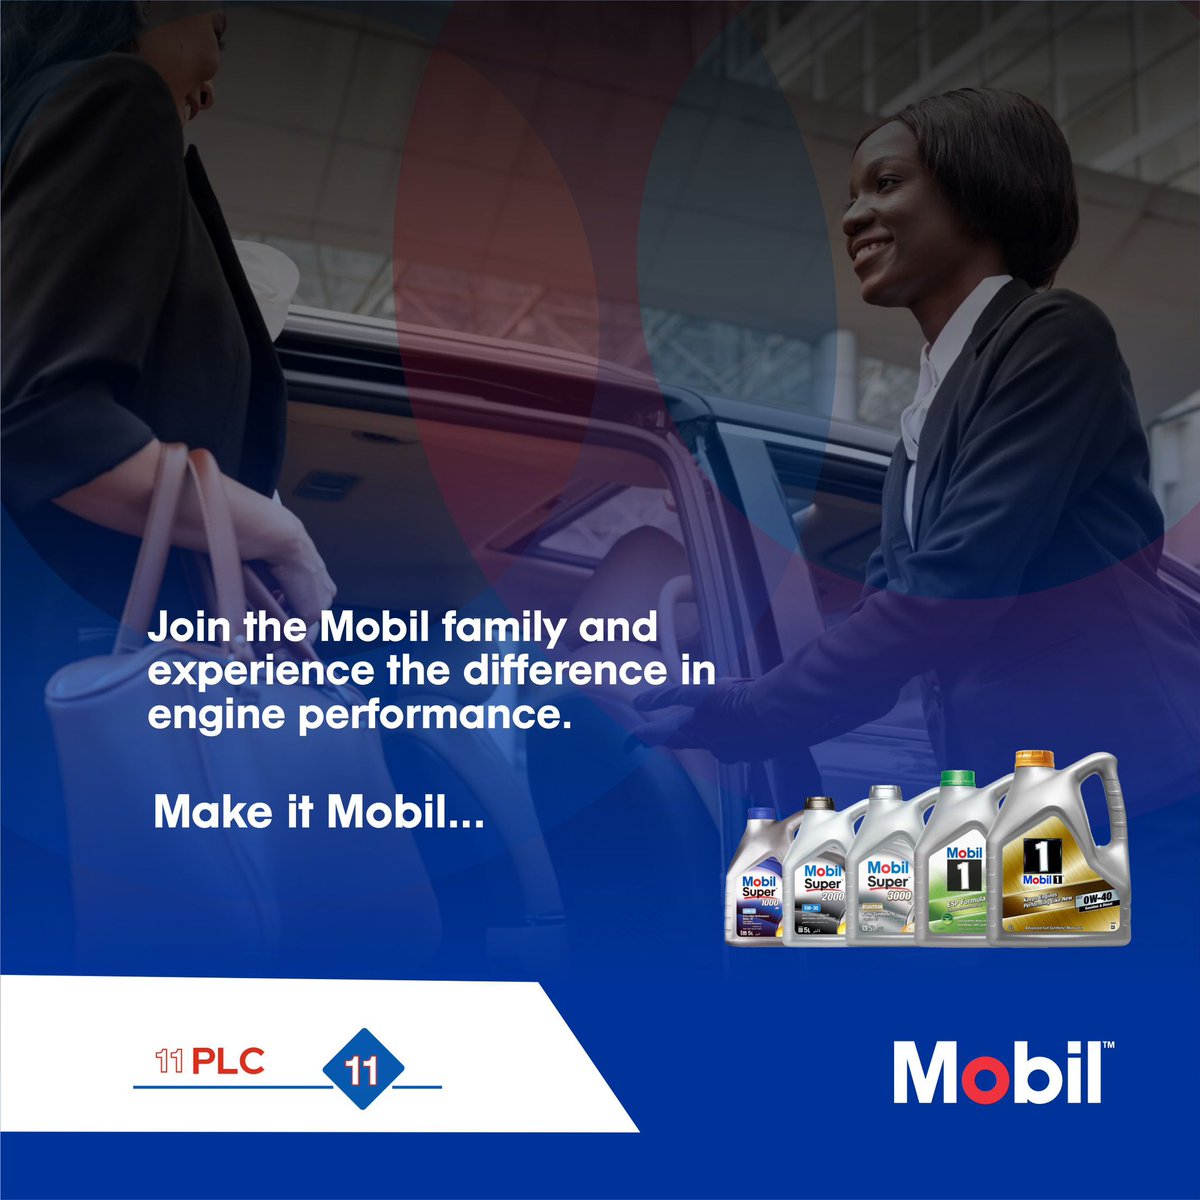 Unleash the power of Mobil in your engine and feel the difference in performance. Join the Mobil family today!

#unbeatableperformance #qualityovereverything #performancematters #enginecare #mobillubricants #mobiloilinnigeria #11plc